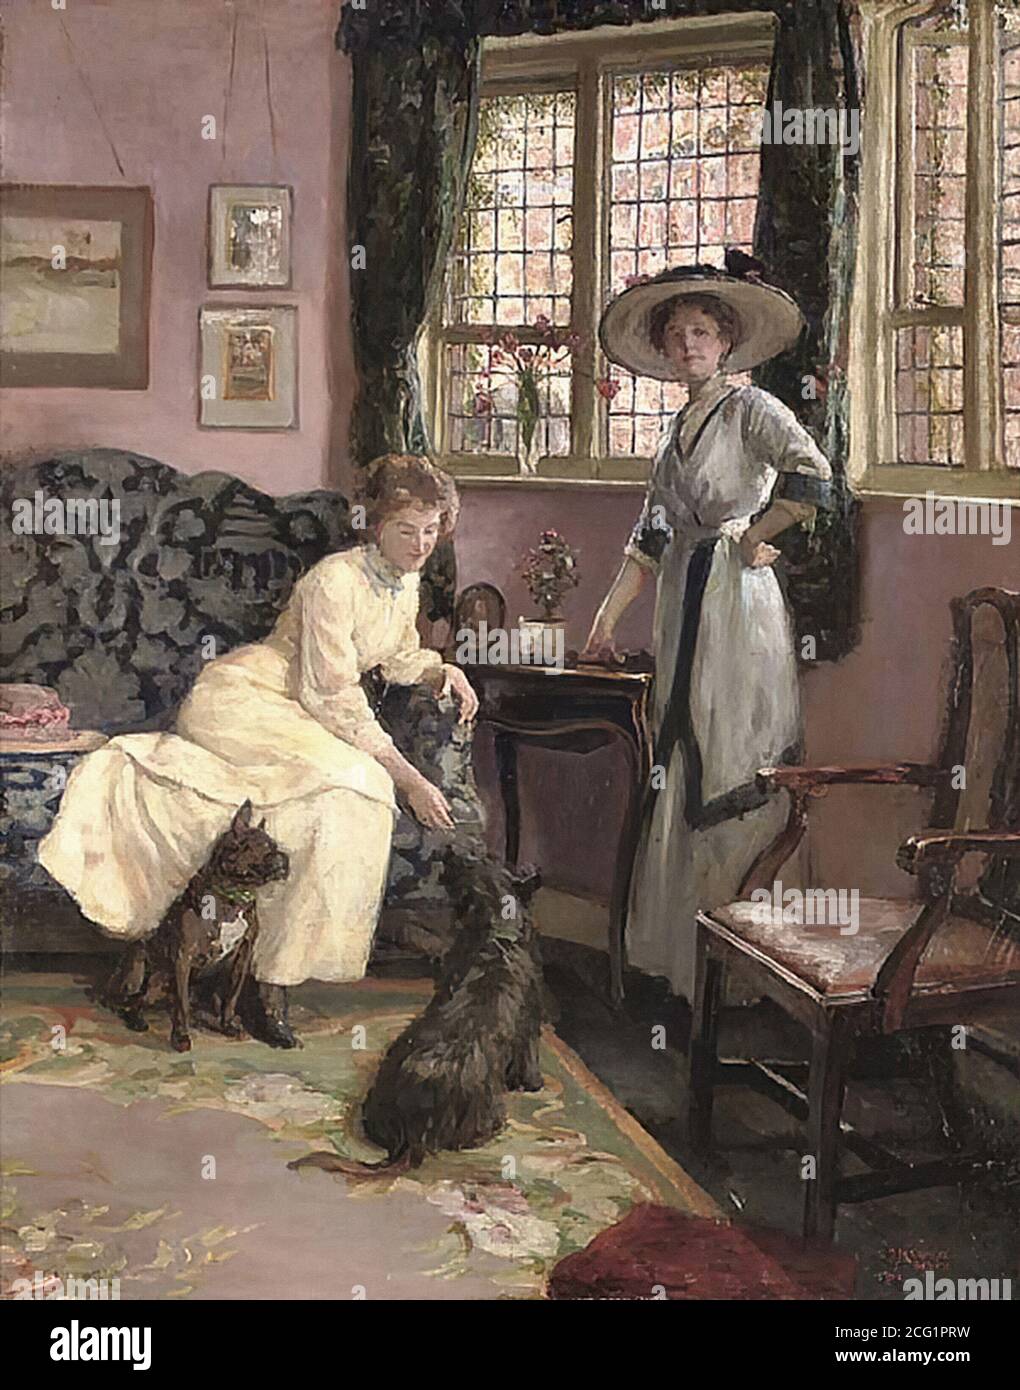 jacomb-hood, george percy - The Drawing Room at No. 26 Tite Street, Chelsea - A Portrait of the Artist's Wife and Sister-in-Law - 21181262864 00806b0942 o Stock Photo